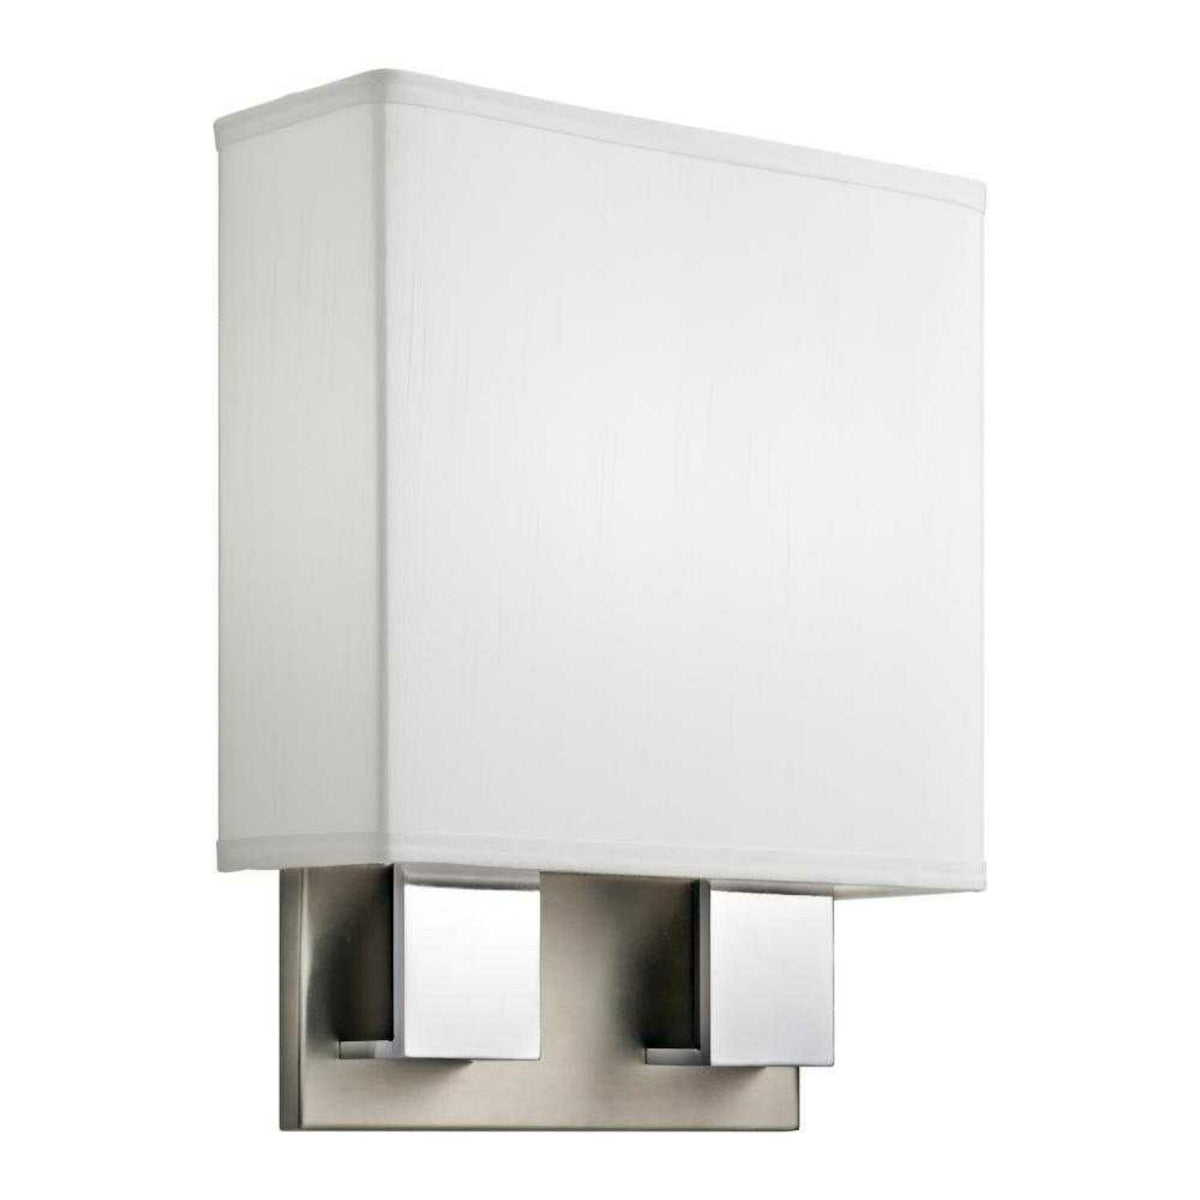 SANTIAGO LED 14.25-INCH WALL SCONCE